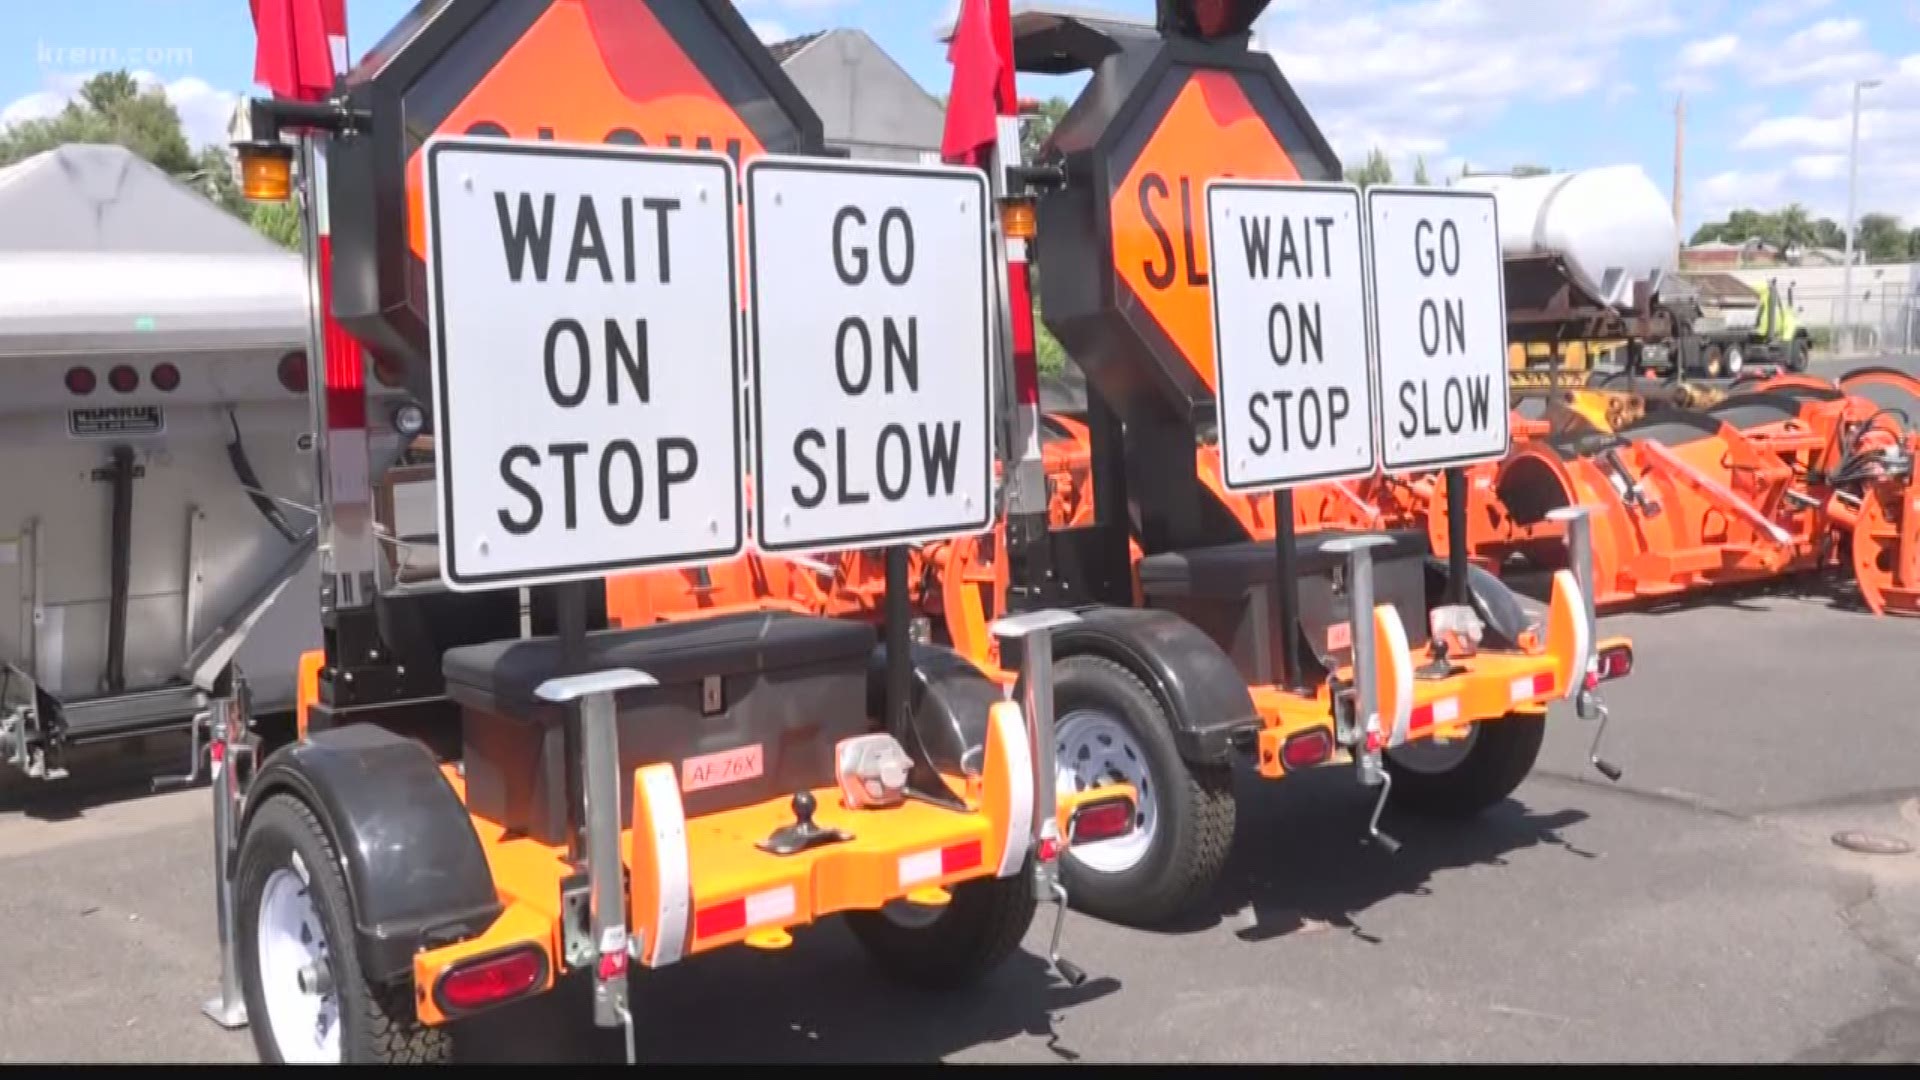 The equipment is designed to lessen the amount of workers in the hot sun and keep them farther from the roads.